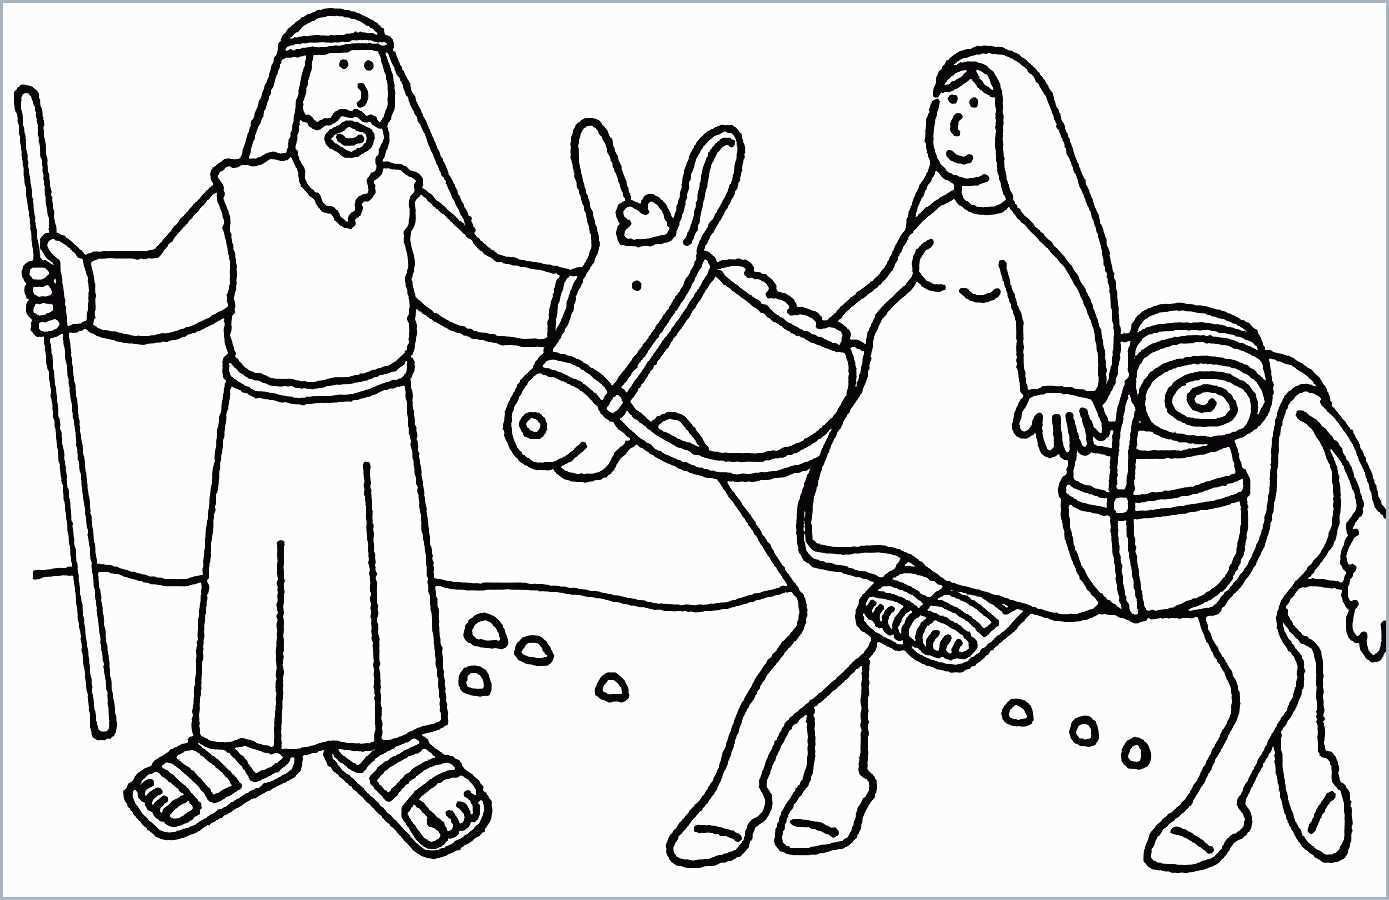 Coloring Pages : Free Printable Bible Coloring And Activityges - Free Printable Bible Christmas Coloring Pages